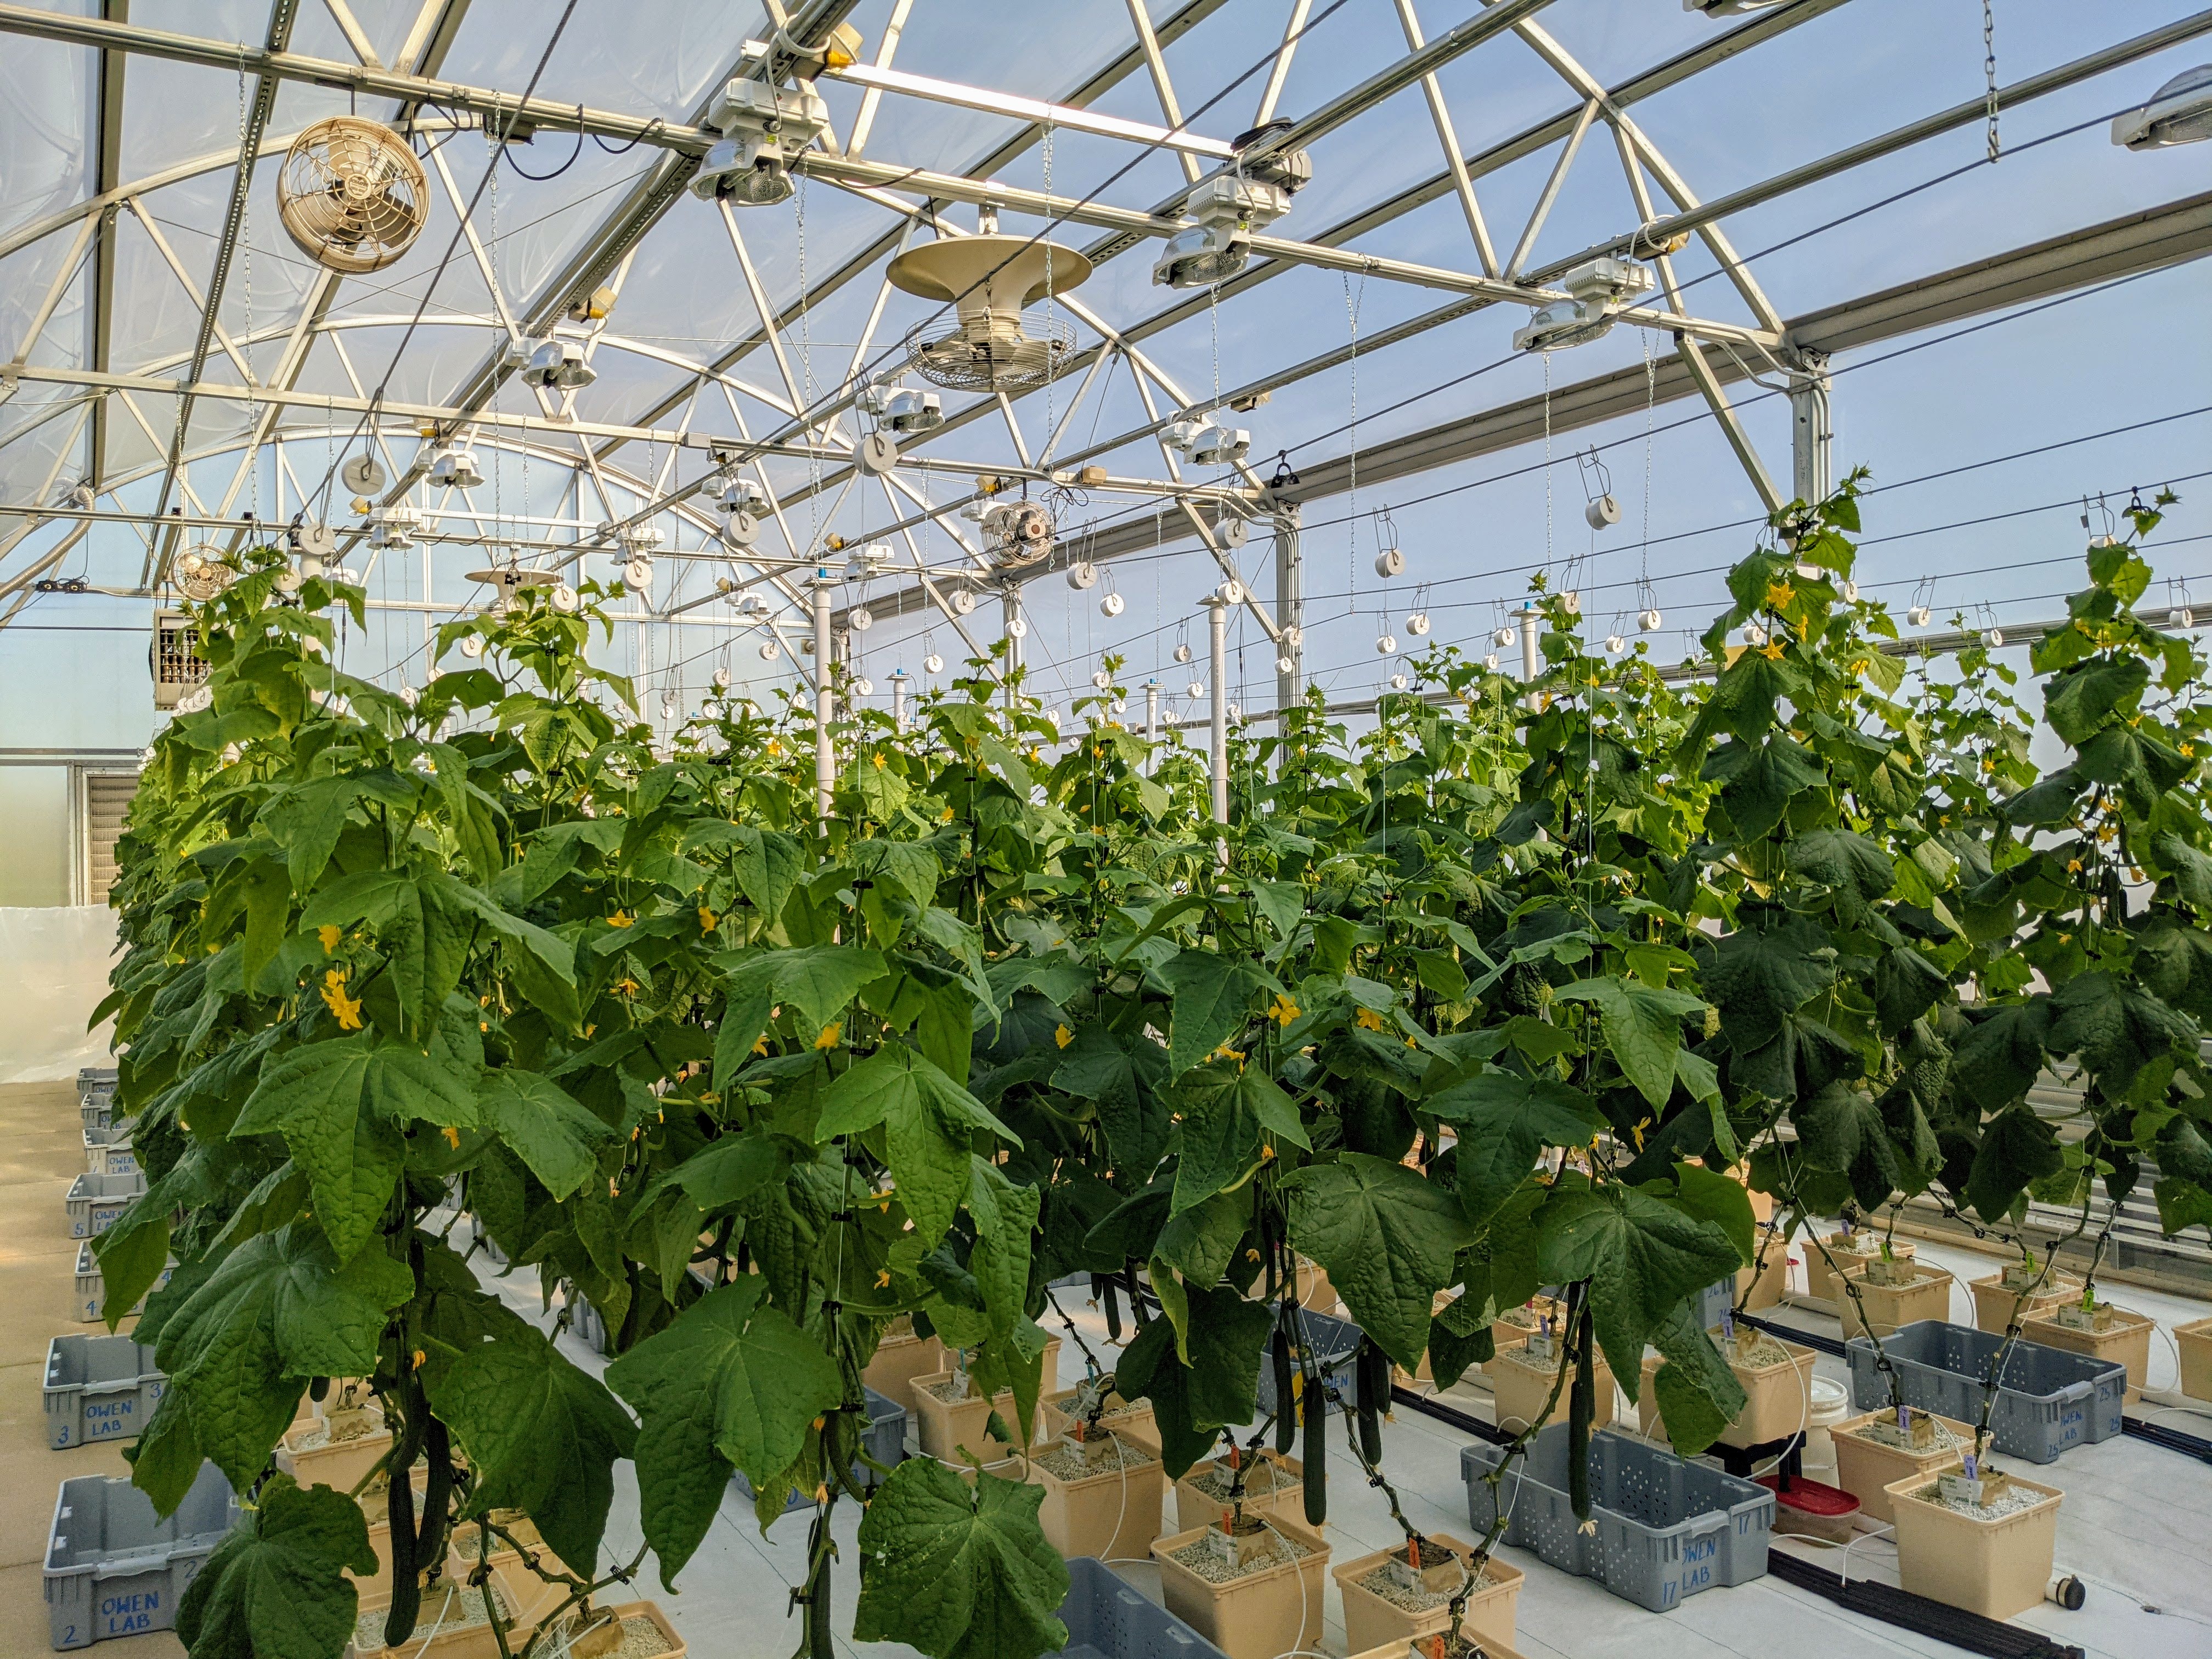 A greenhouse on UK's Horticulture Research Farm in Lexington plays host to a two-year study on cucumber varieties for greenhouse production. Photo by Garrett Owen